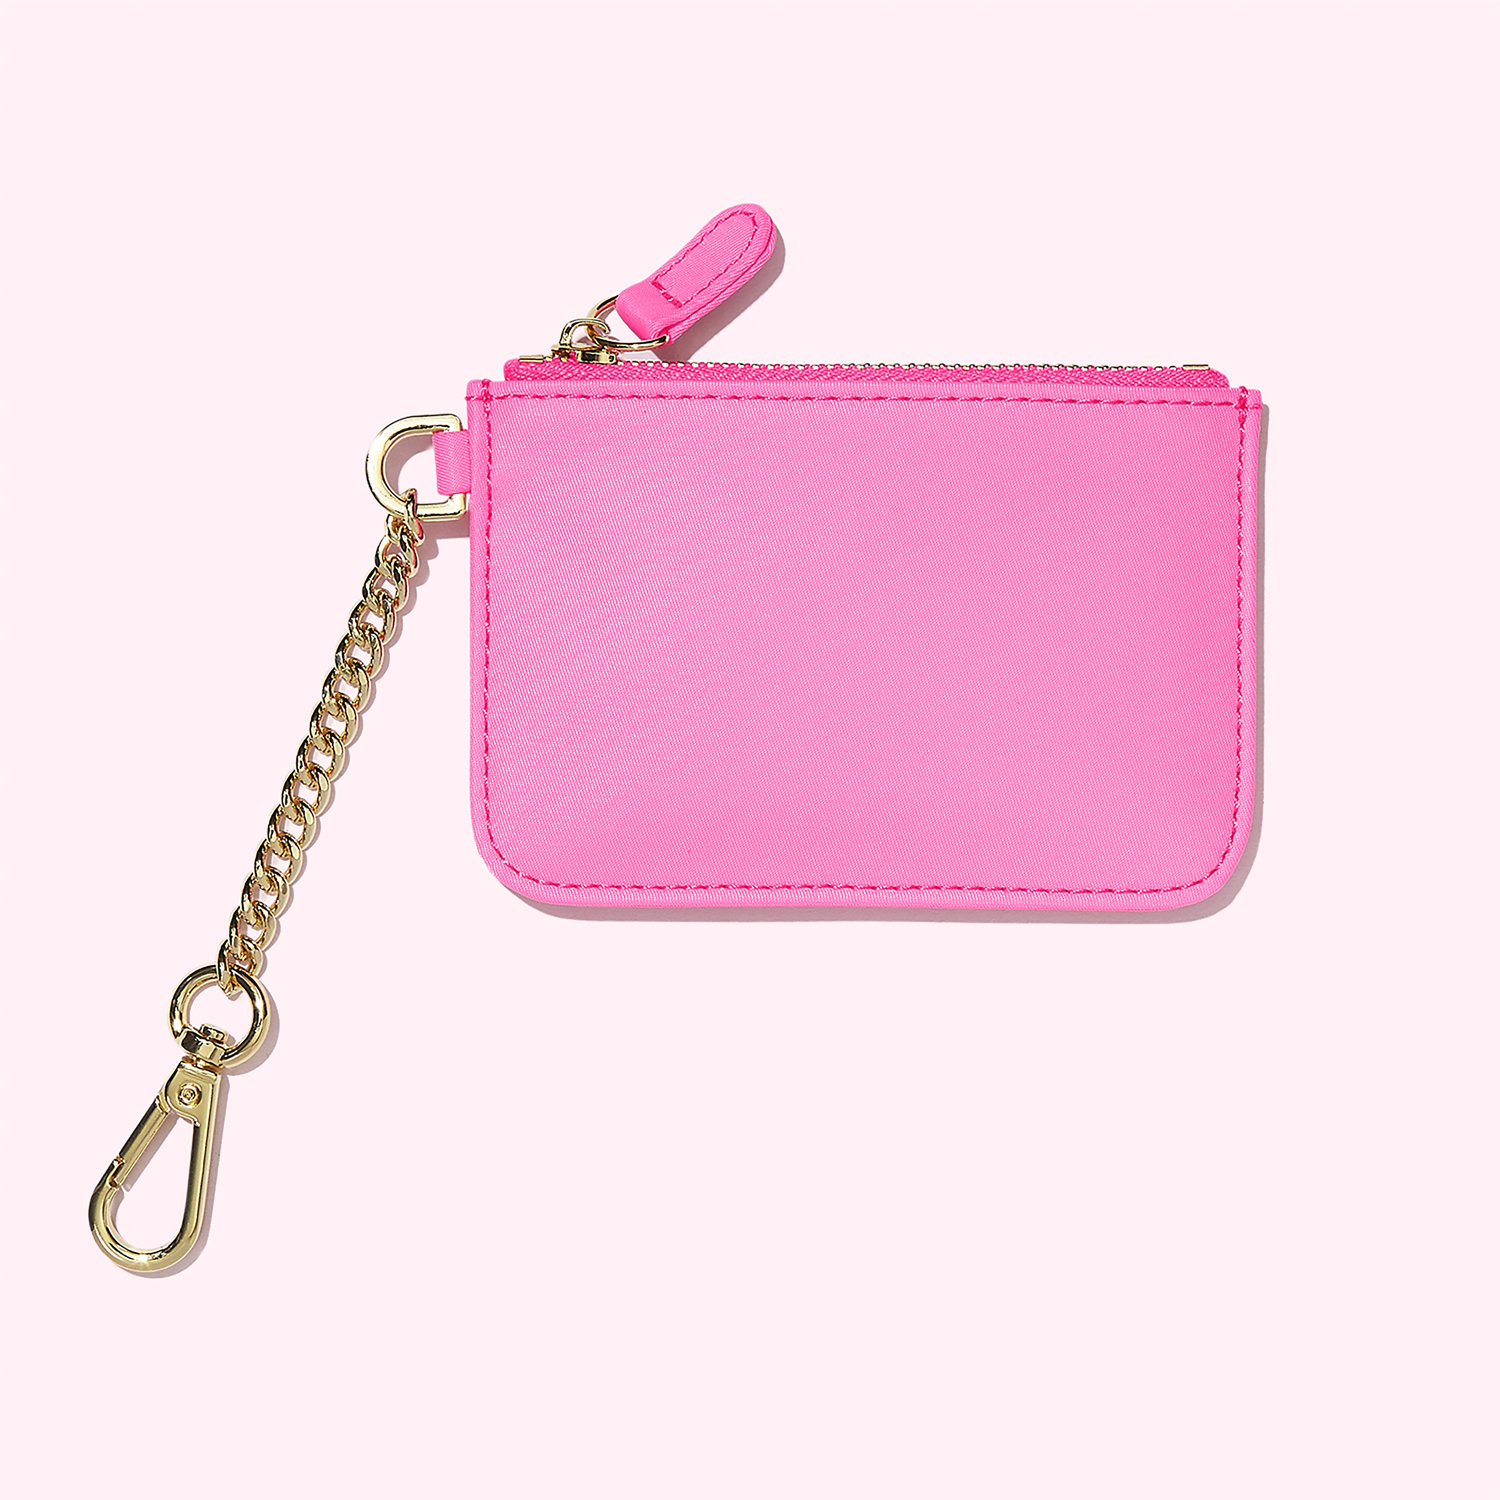 11 Keychain Wallets For When You Just Need the Essentials - Fashionista